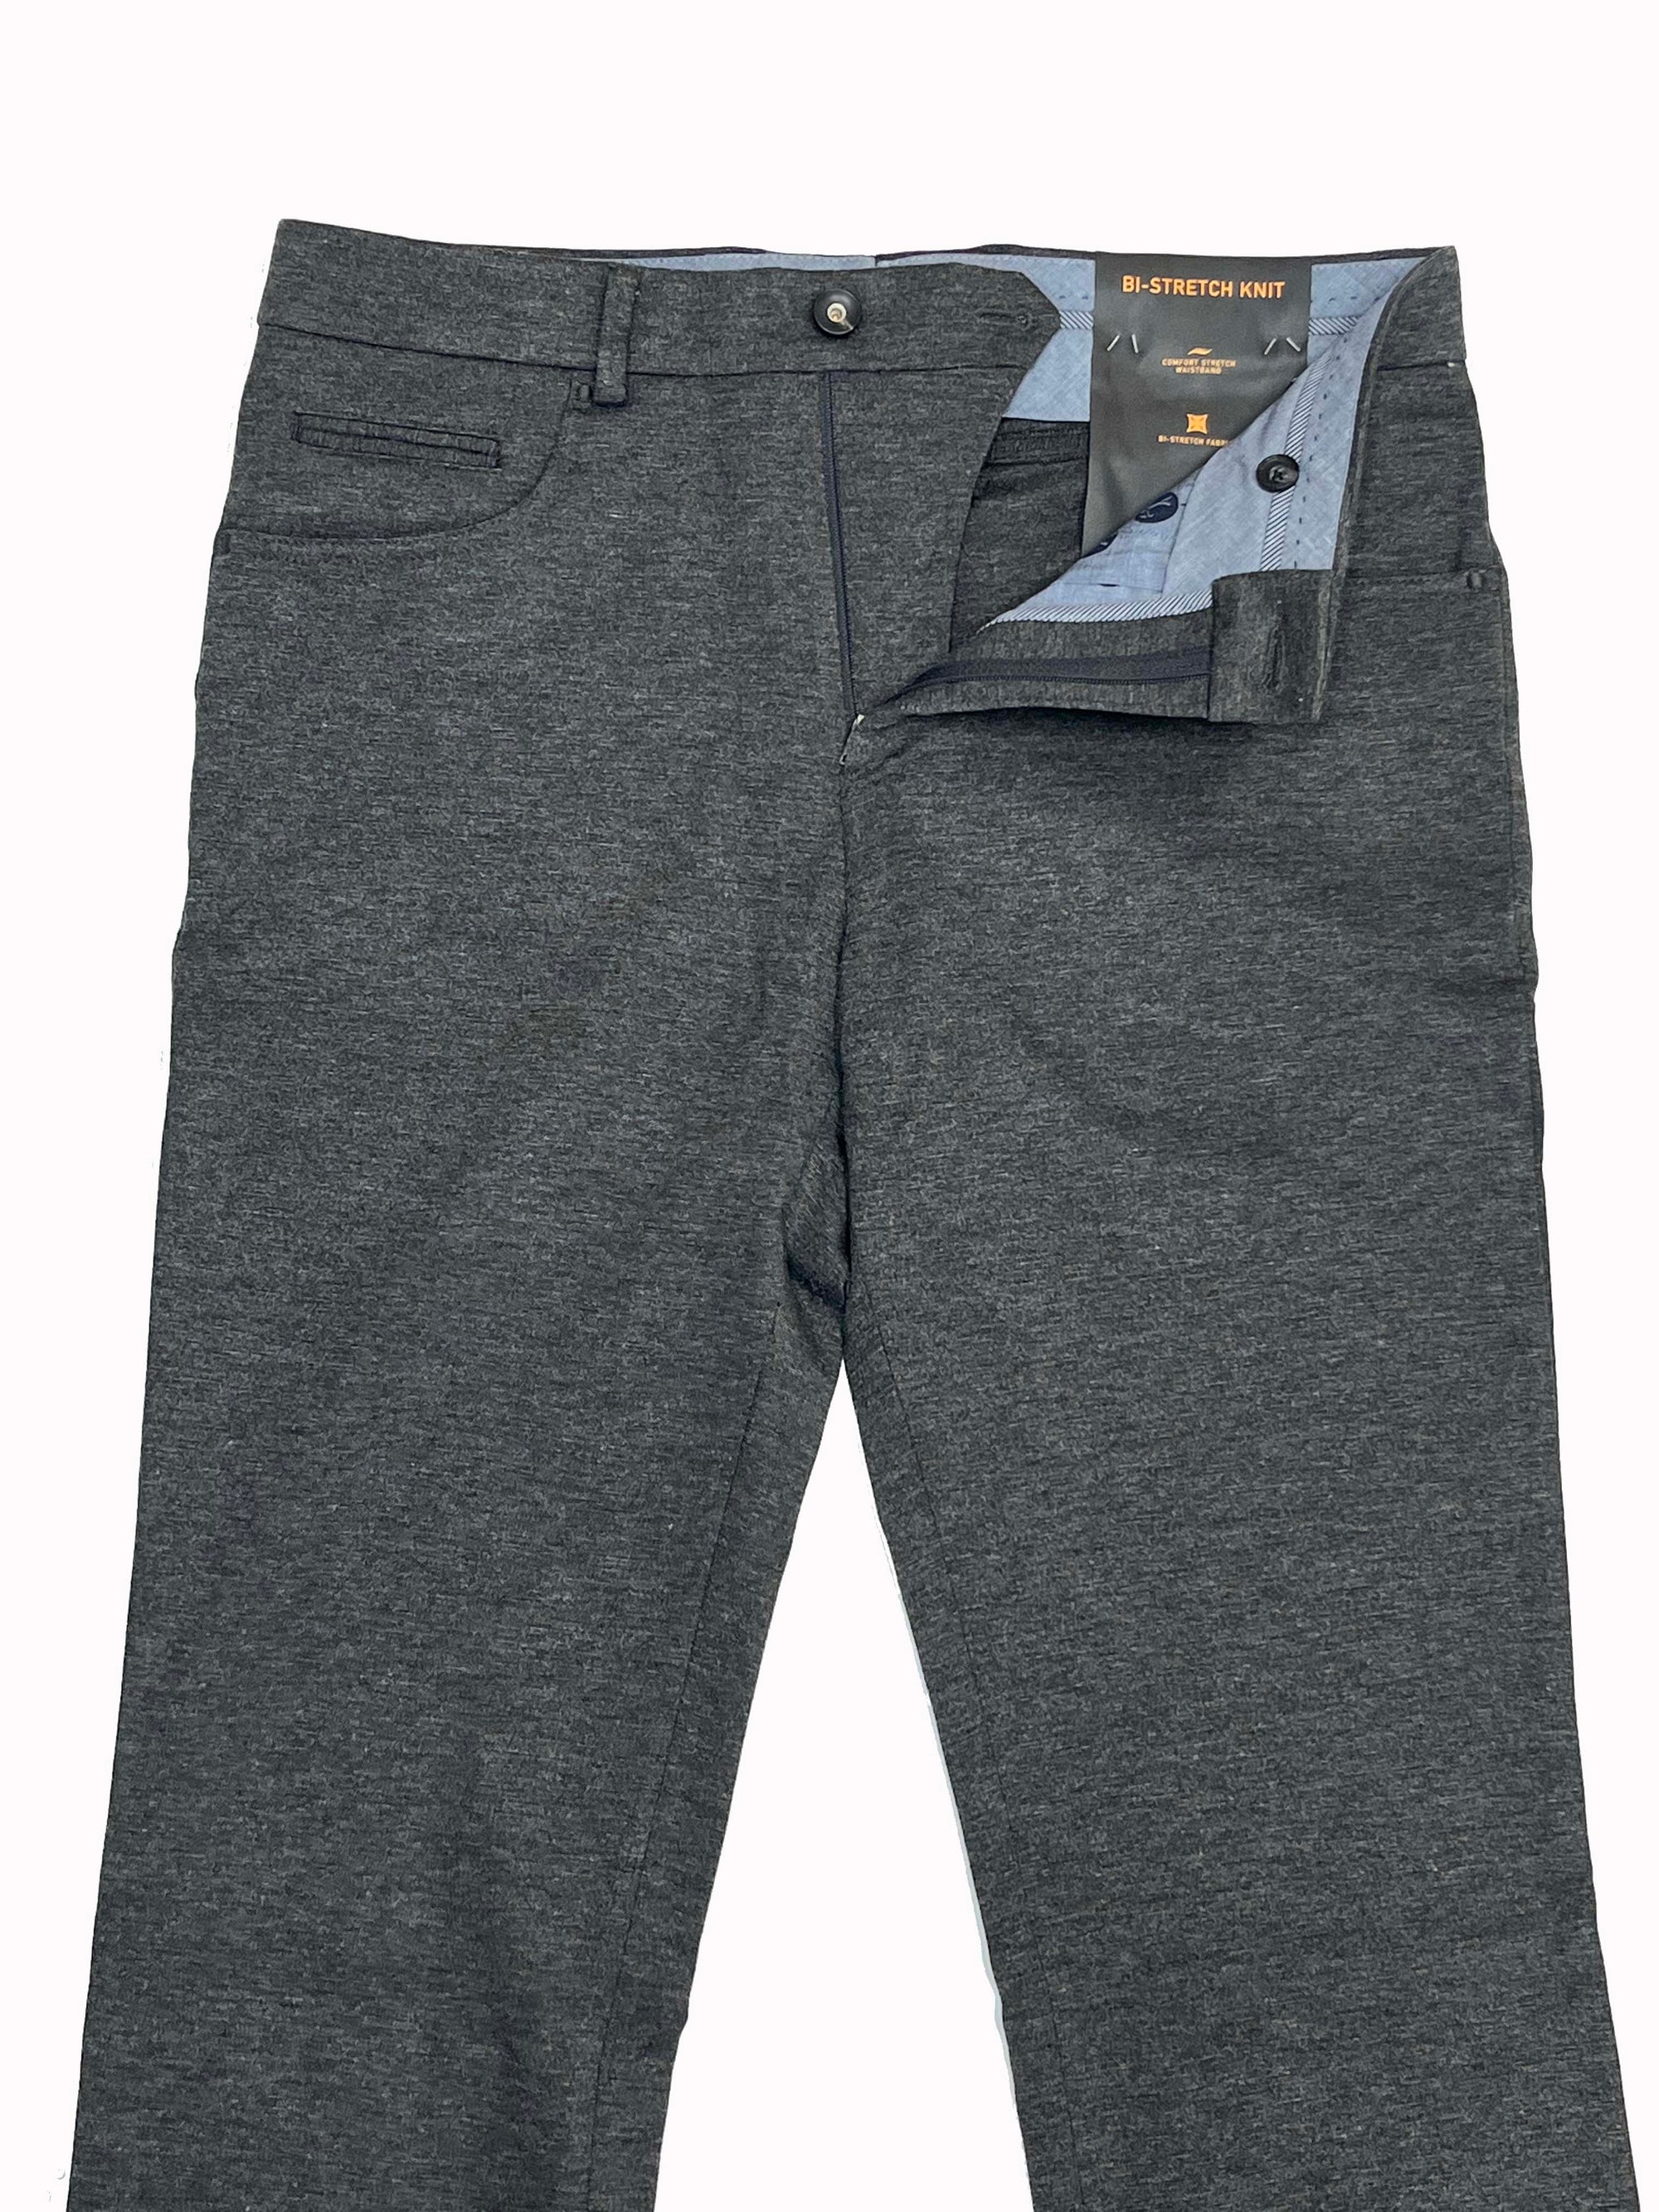 BIBICO Cali Essential Pointelle Pants Dark Grey : Large - PLAISIRS -  Wellbeing and Lifestyle Products & Gifts